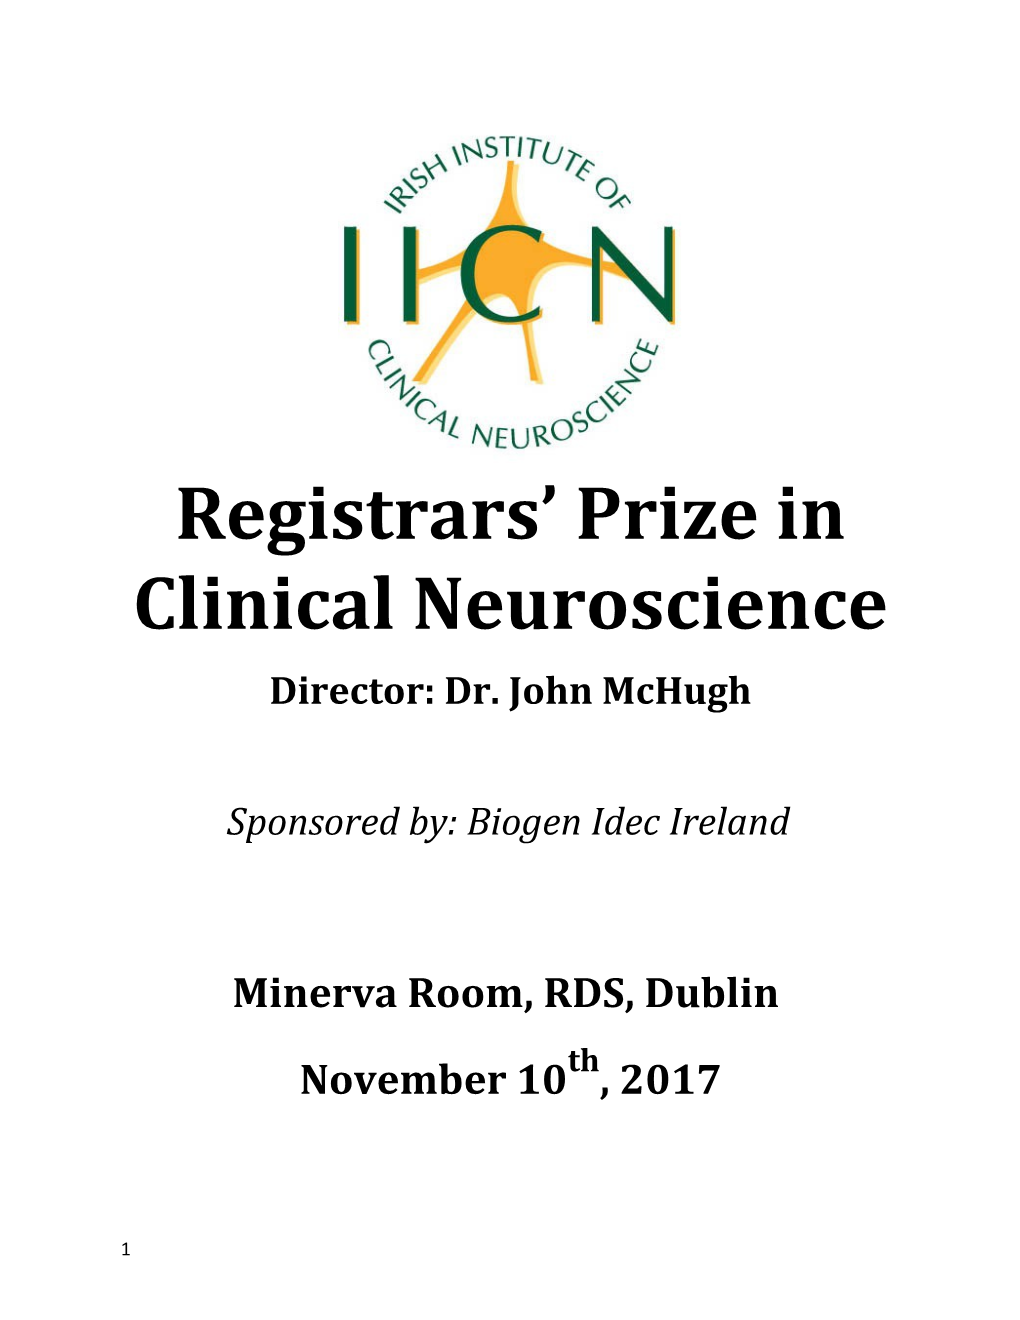 Registrars Prize in Clinical Neuroscience